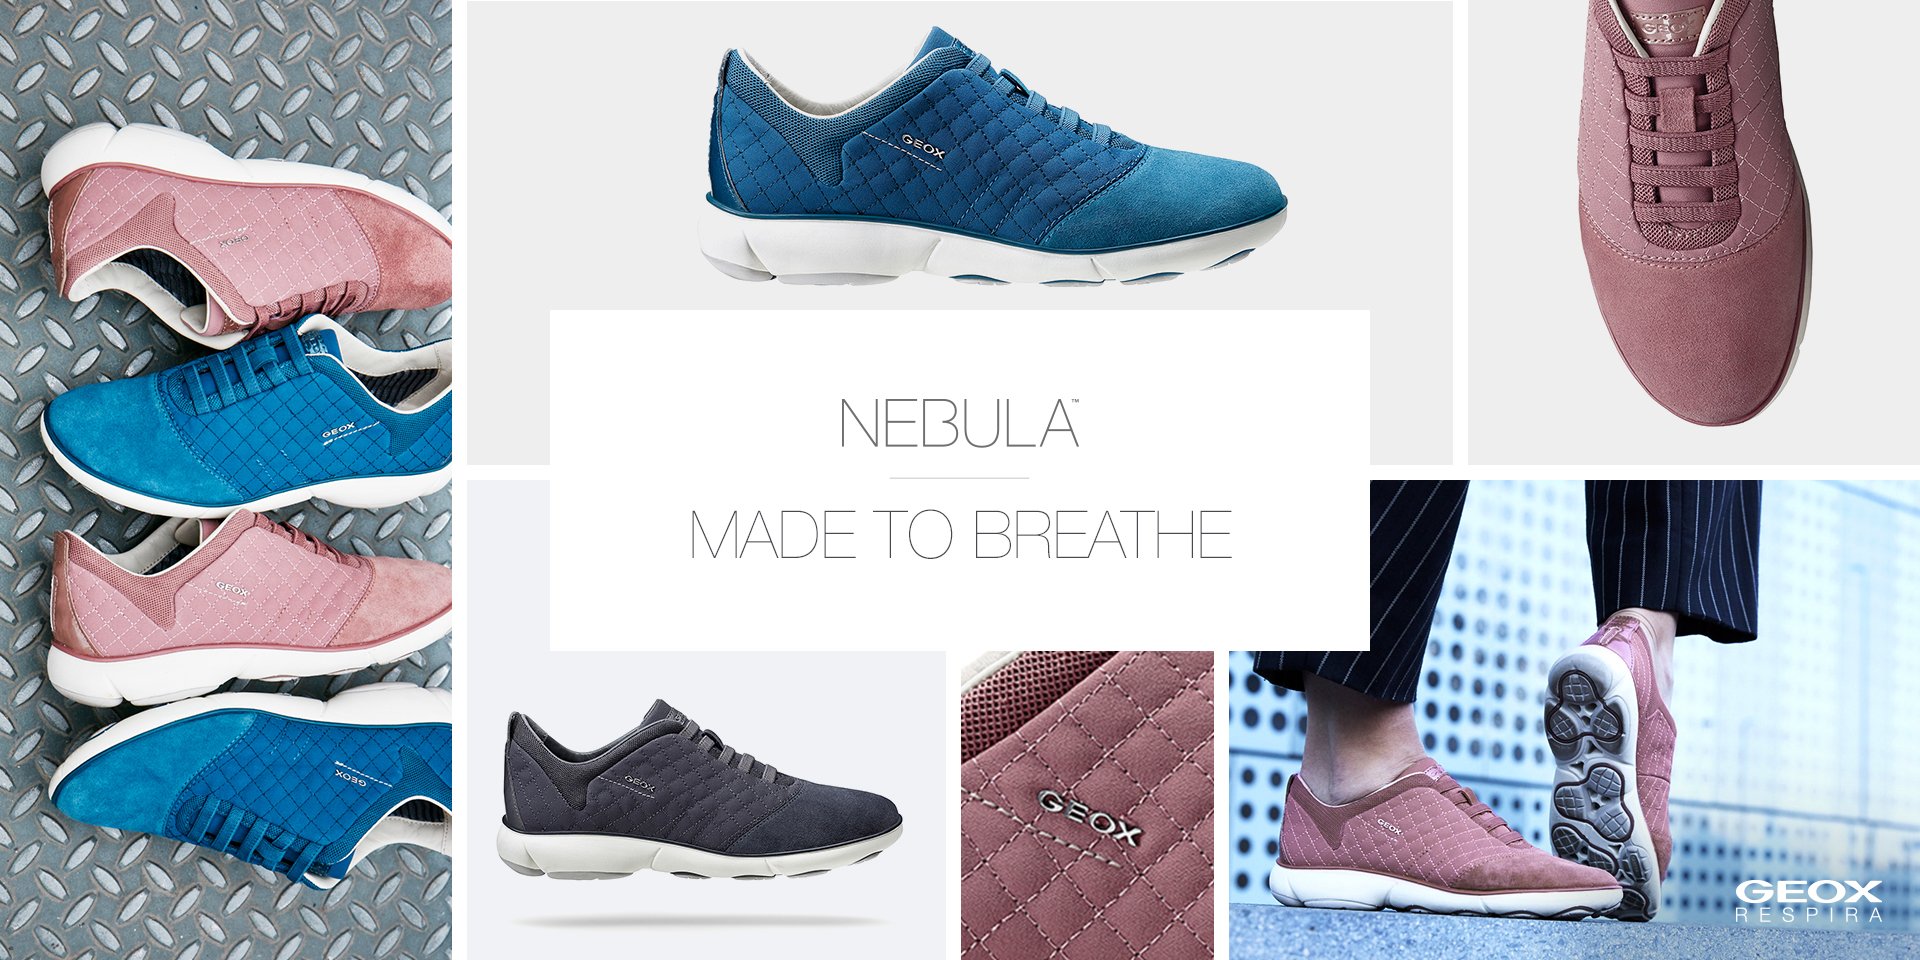 semanal formación Acera GEOX on Twitter: "Start off on the right foot by wearing #Geox Nebula and  #StartBreathing! #women #sporty https://t.co/NhQcztsMlH  https://t.co/qqqZz4SL6M" / Twitter